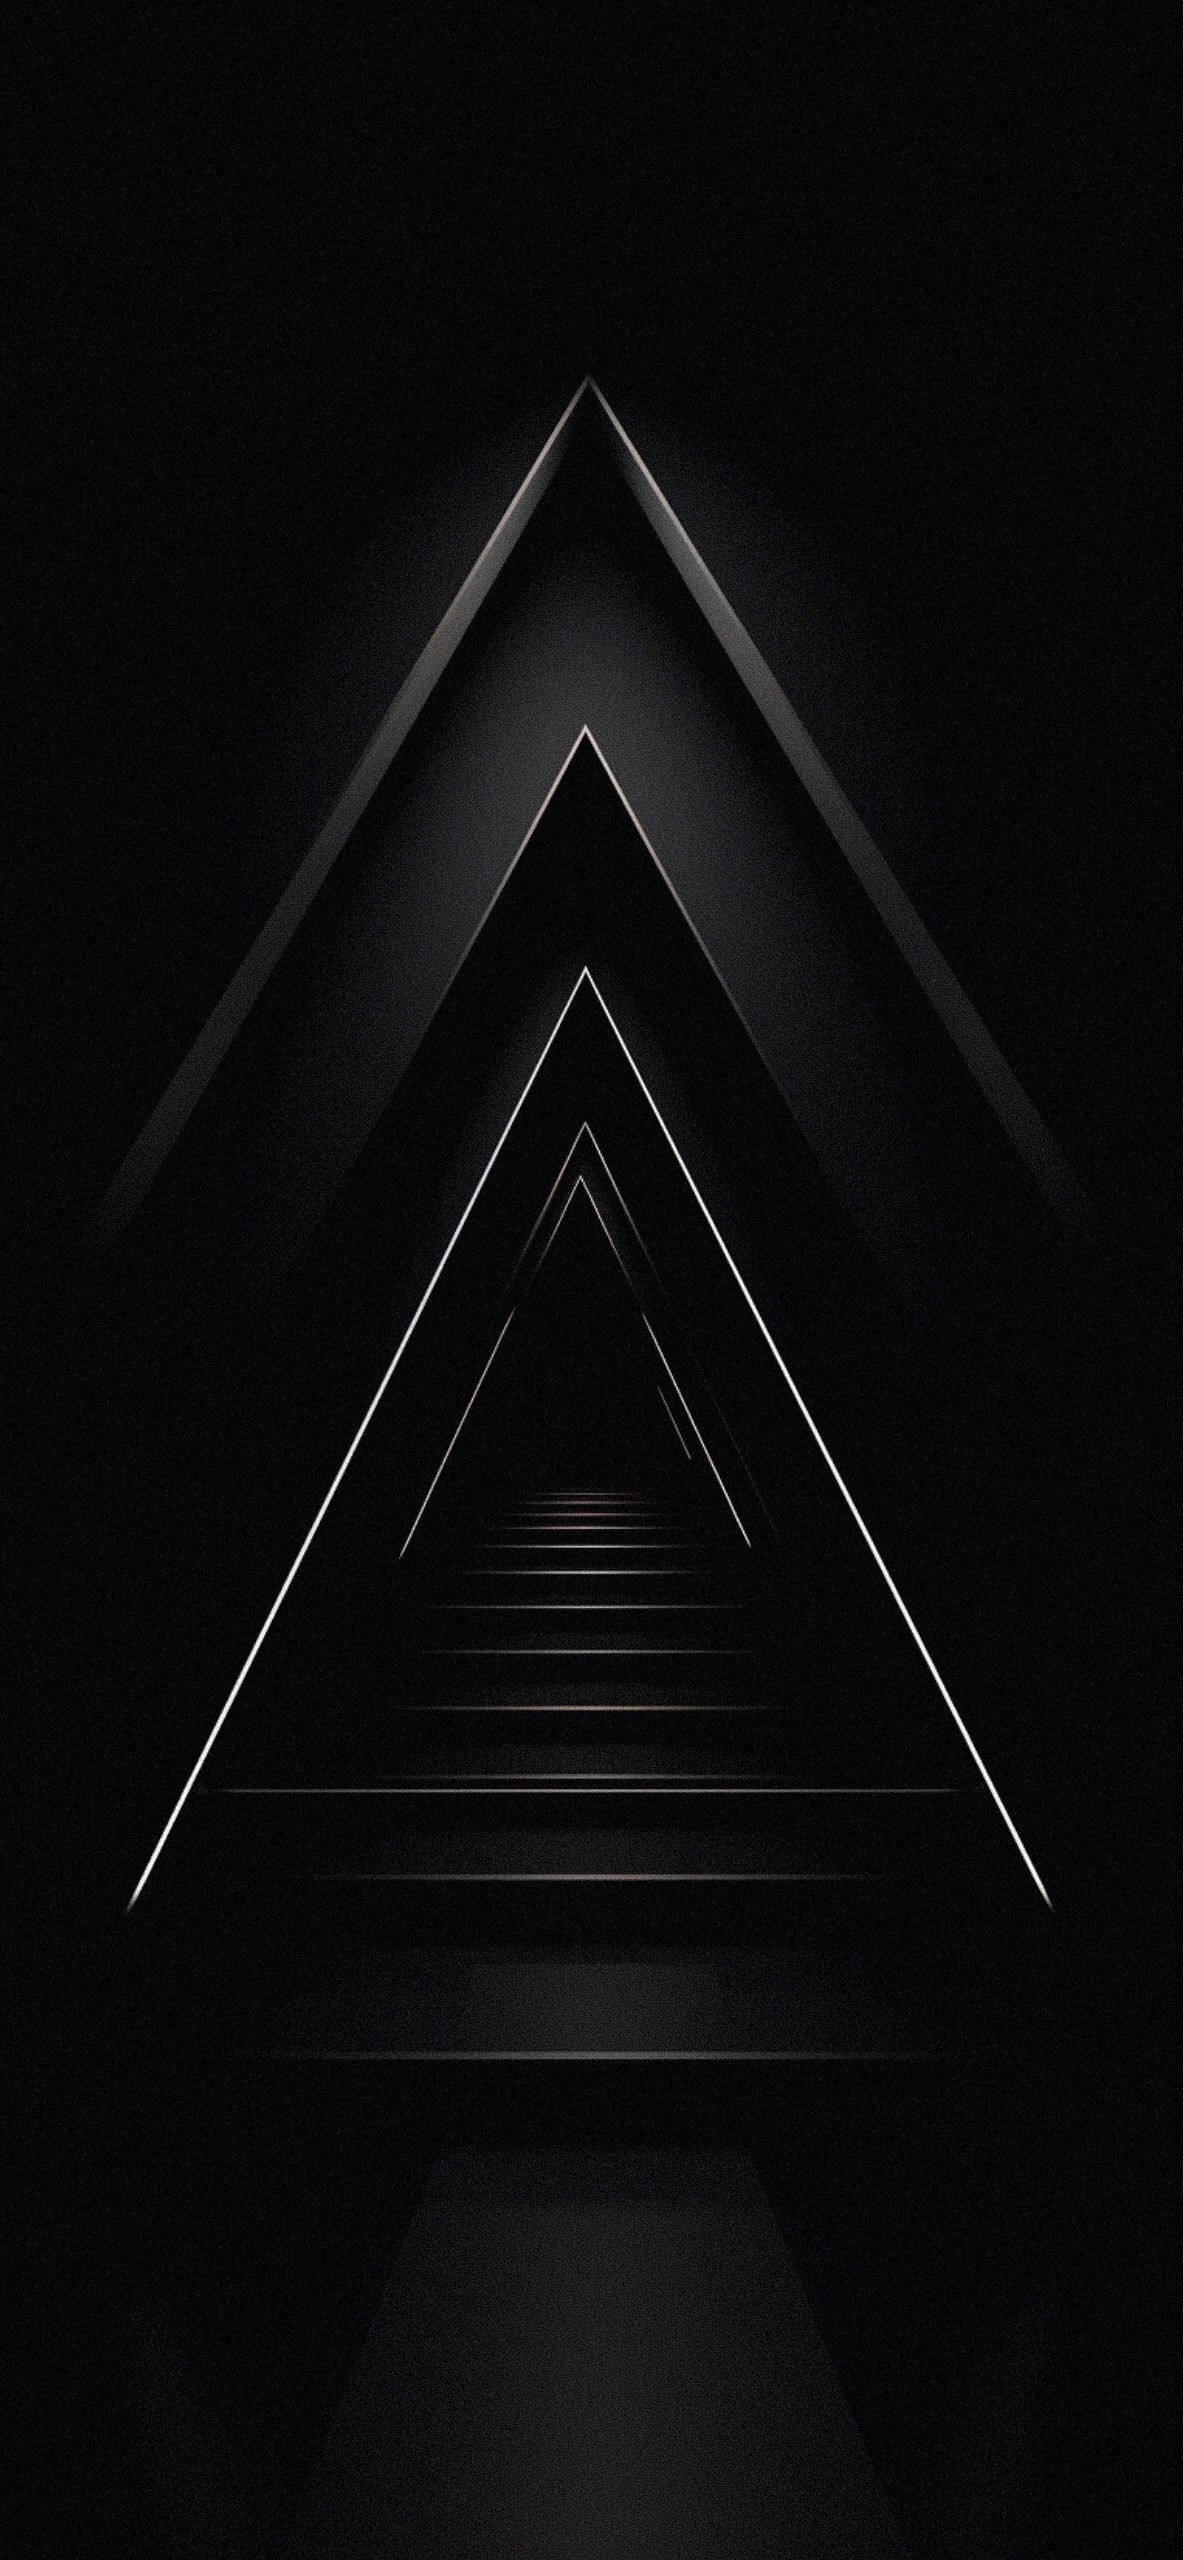 A black and white image of a triangle with a staircase in the background - Black phone, minimalist